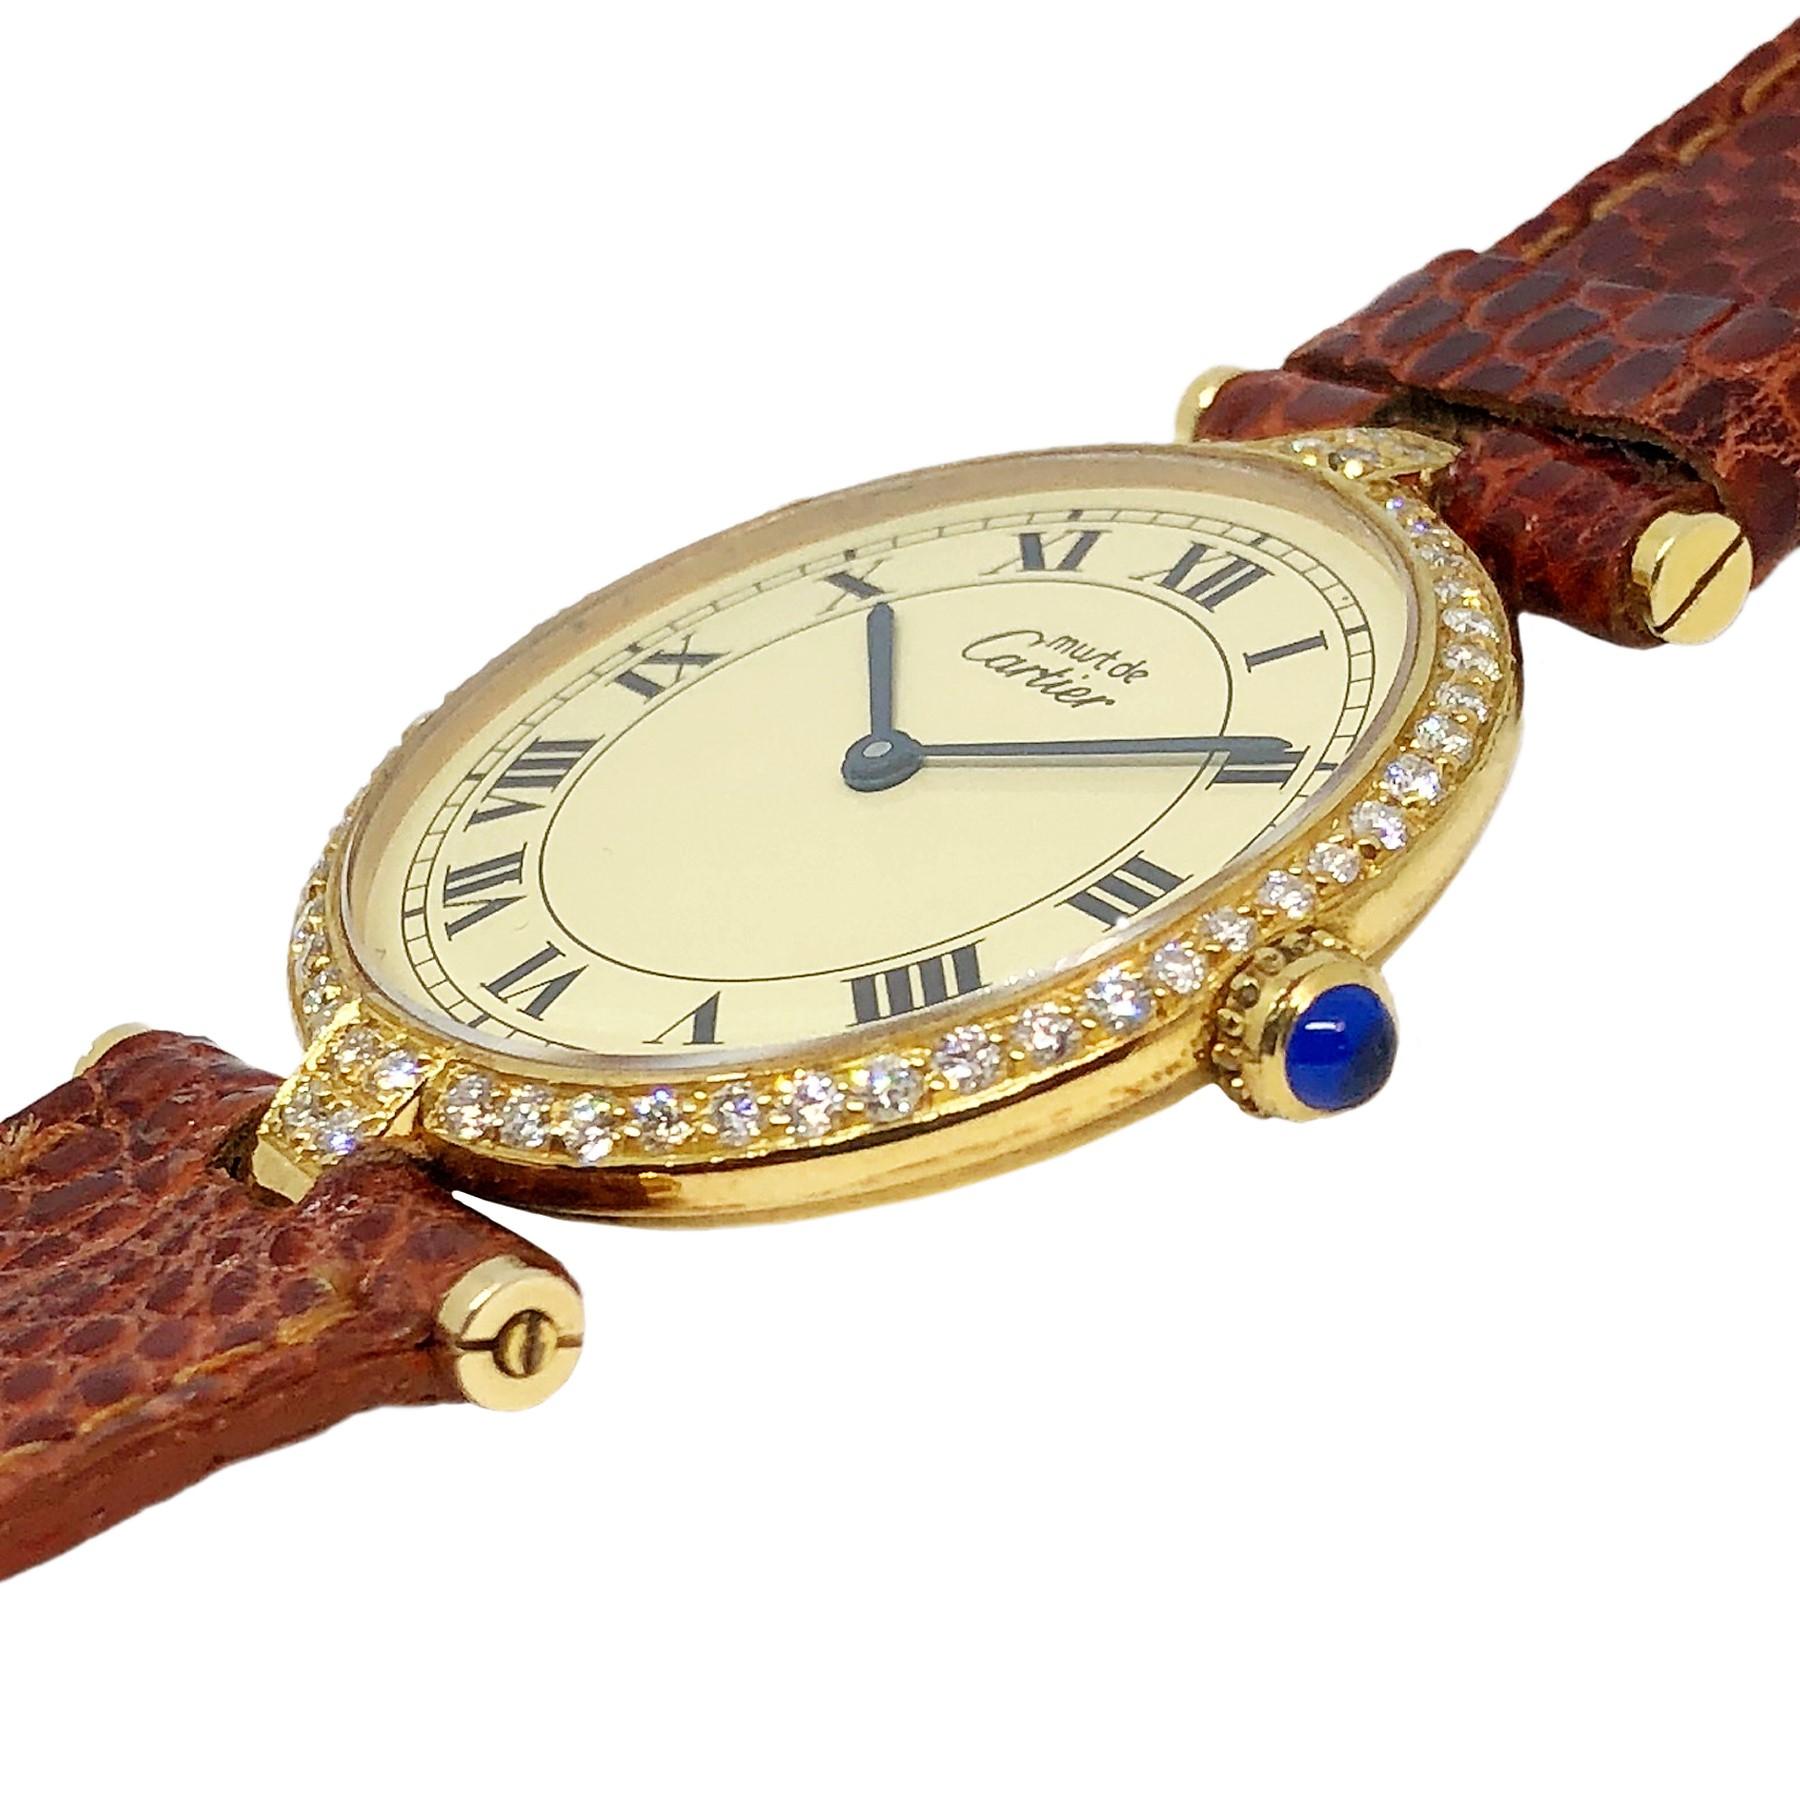 Circa 2005 Cartier Vendome Wrist watch, 30 MM 2 Piece Vermeil ( Gold Plate on .925 Sterling ) case. Quartz Movement, Cream dial with Black Roman numerals. Diamond set bezel of Round Brilliant cuts totaling 1.20 carats. New Brown Lizard strap with